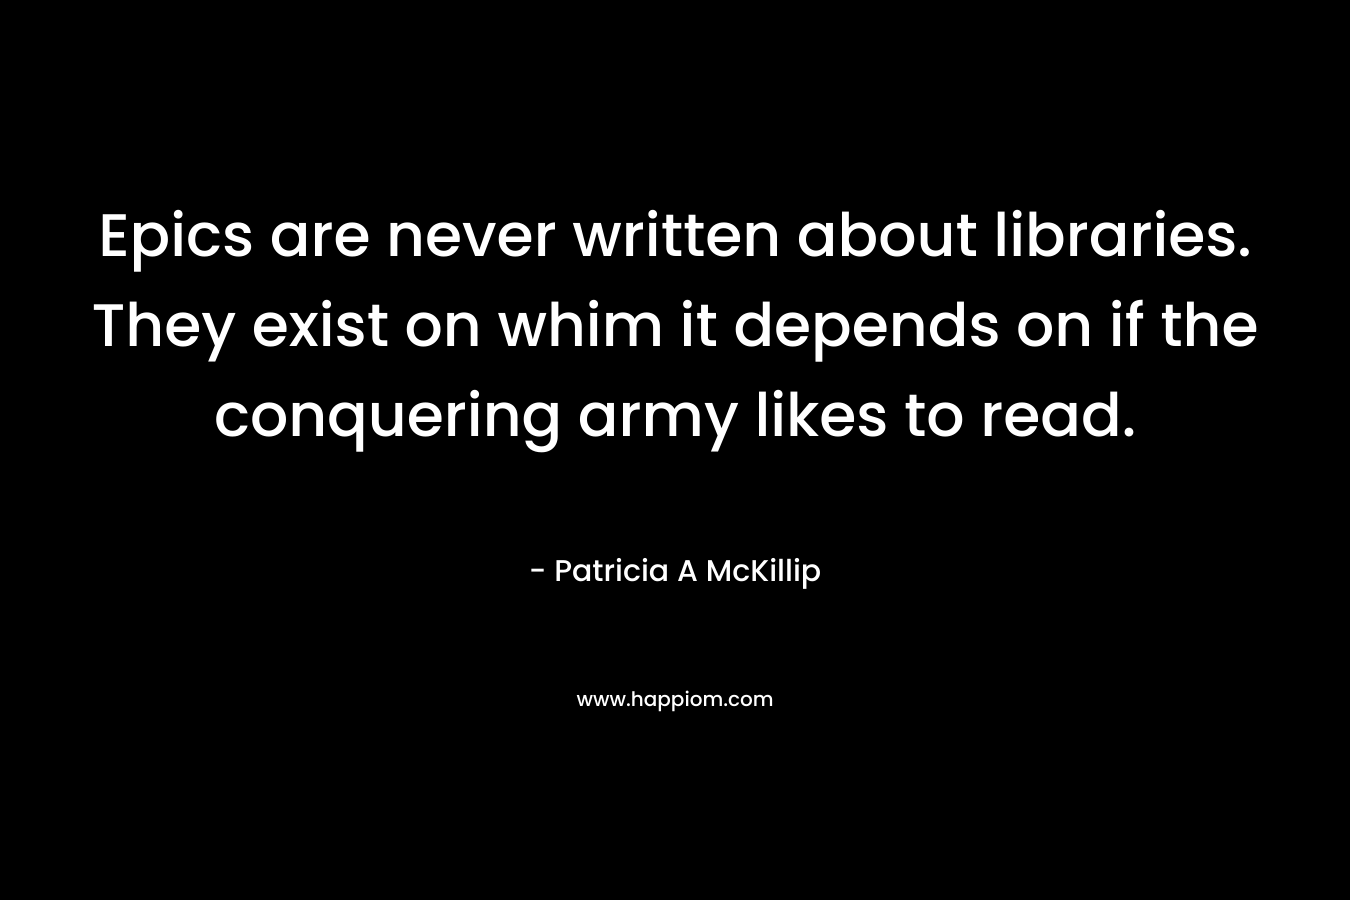 Epics are never written about libraries. They exist on whim it depends on if the conquering army likes to read. – Patricia A McKillip